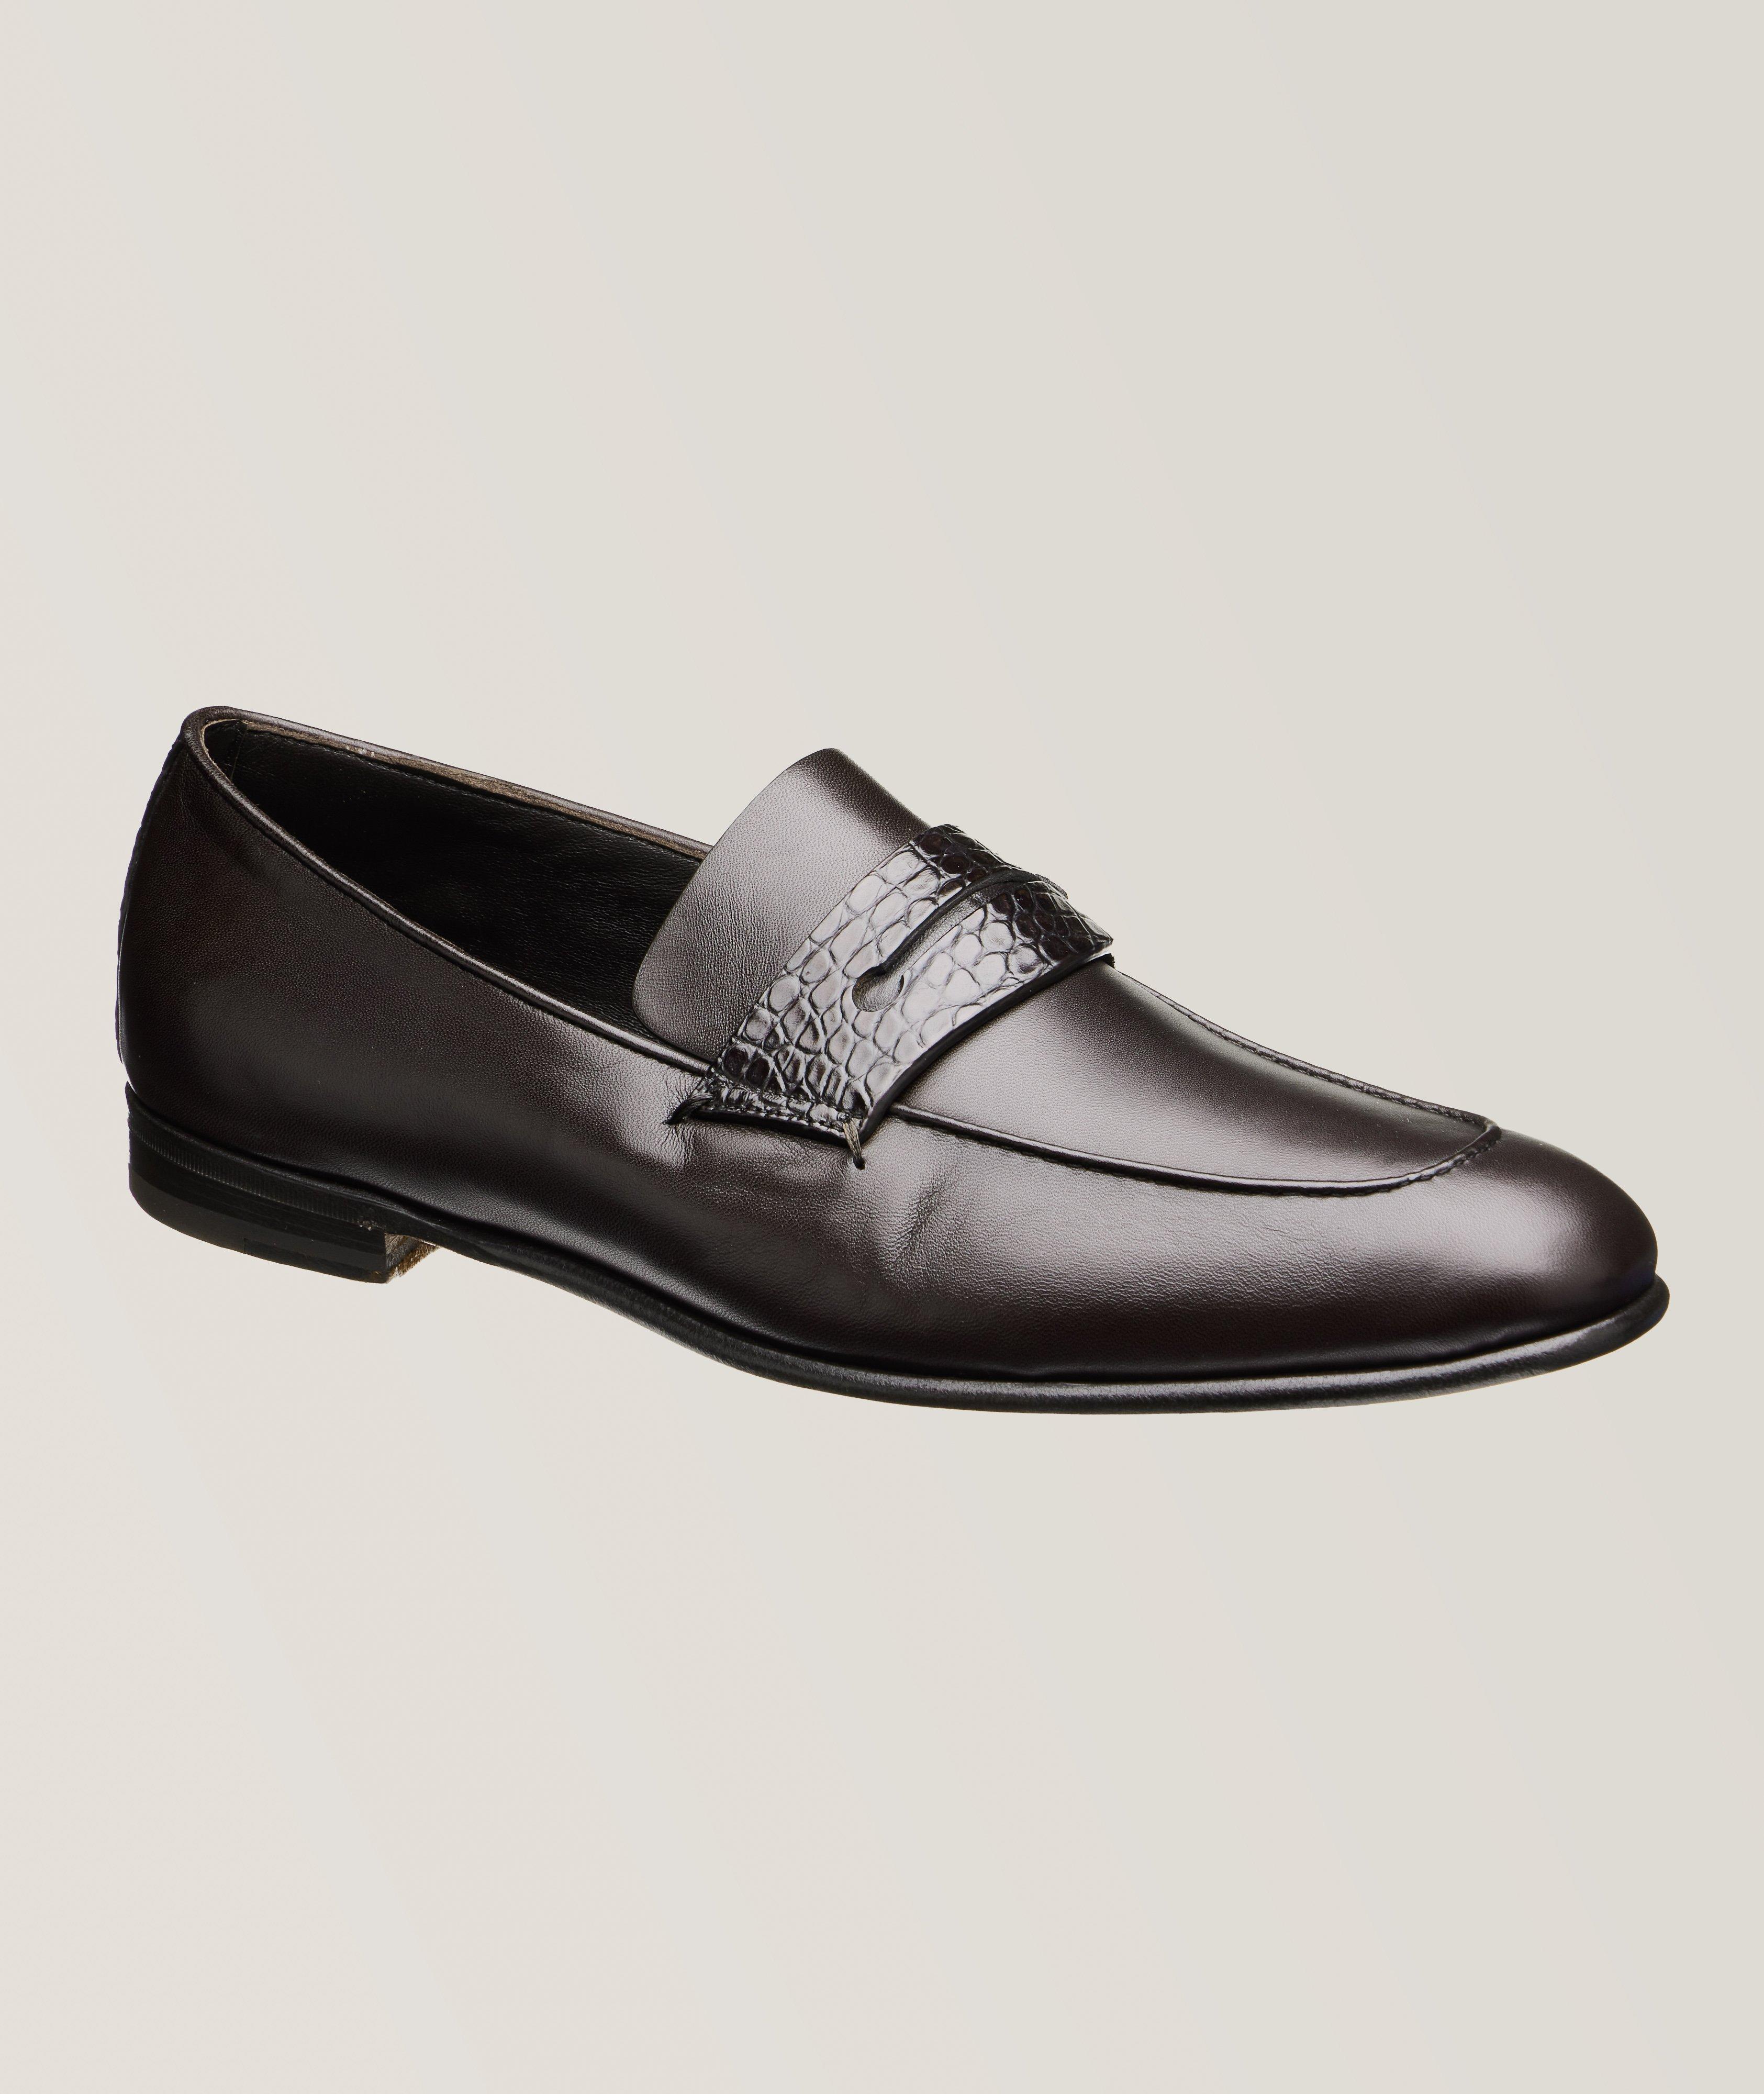 L'Asola Penny Loafers image 0